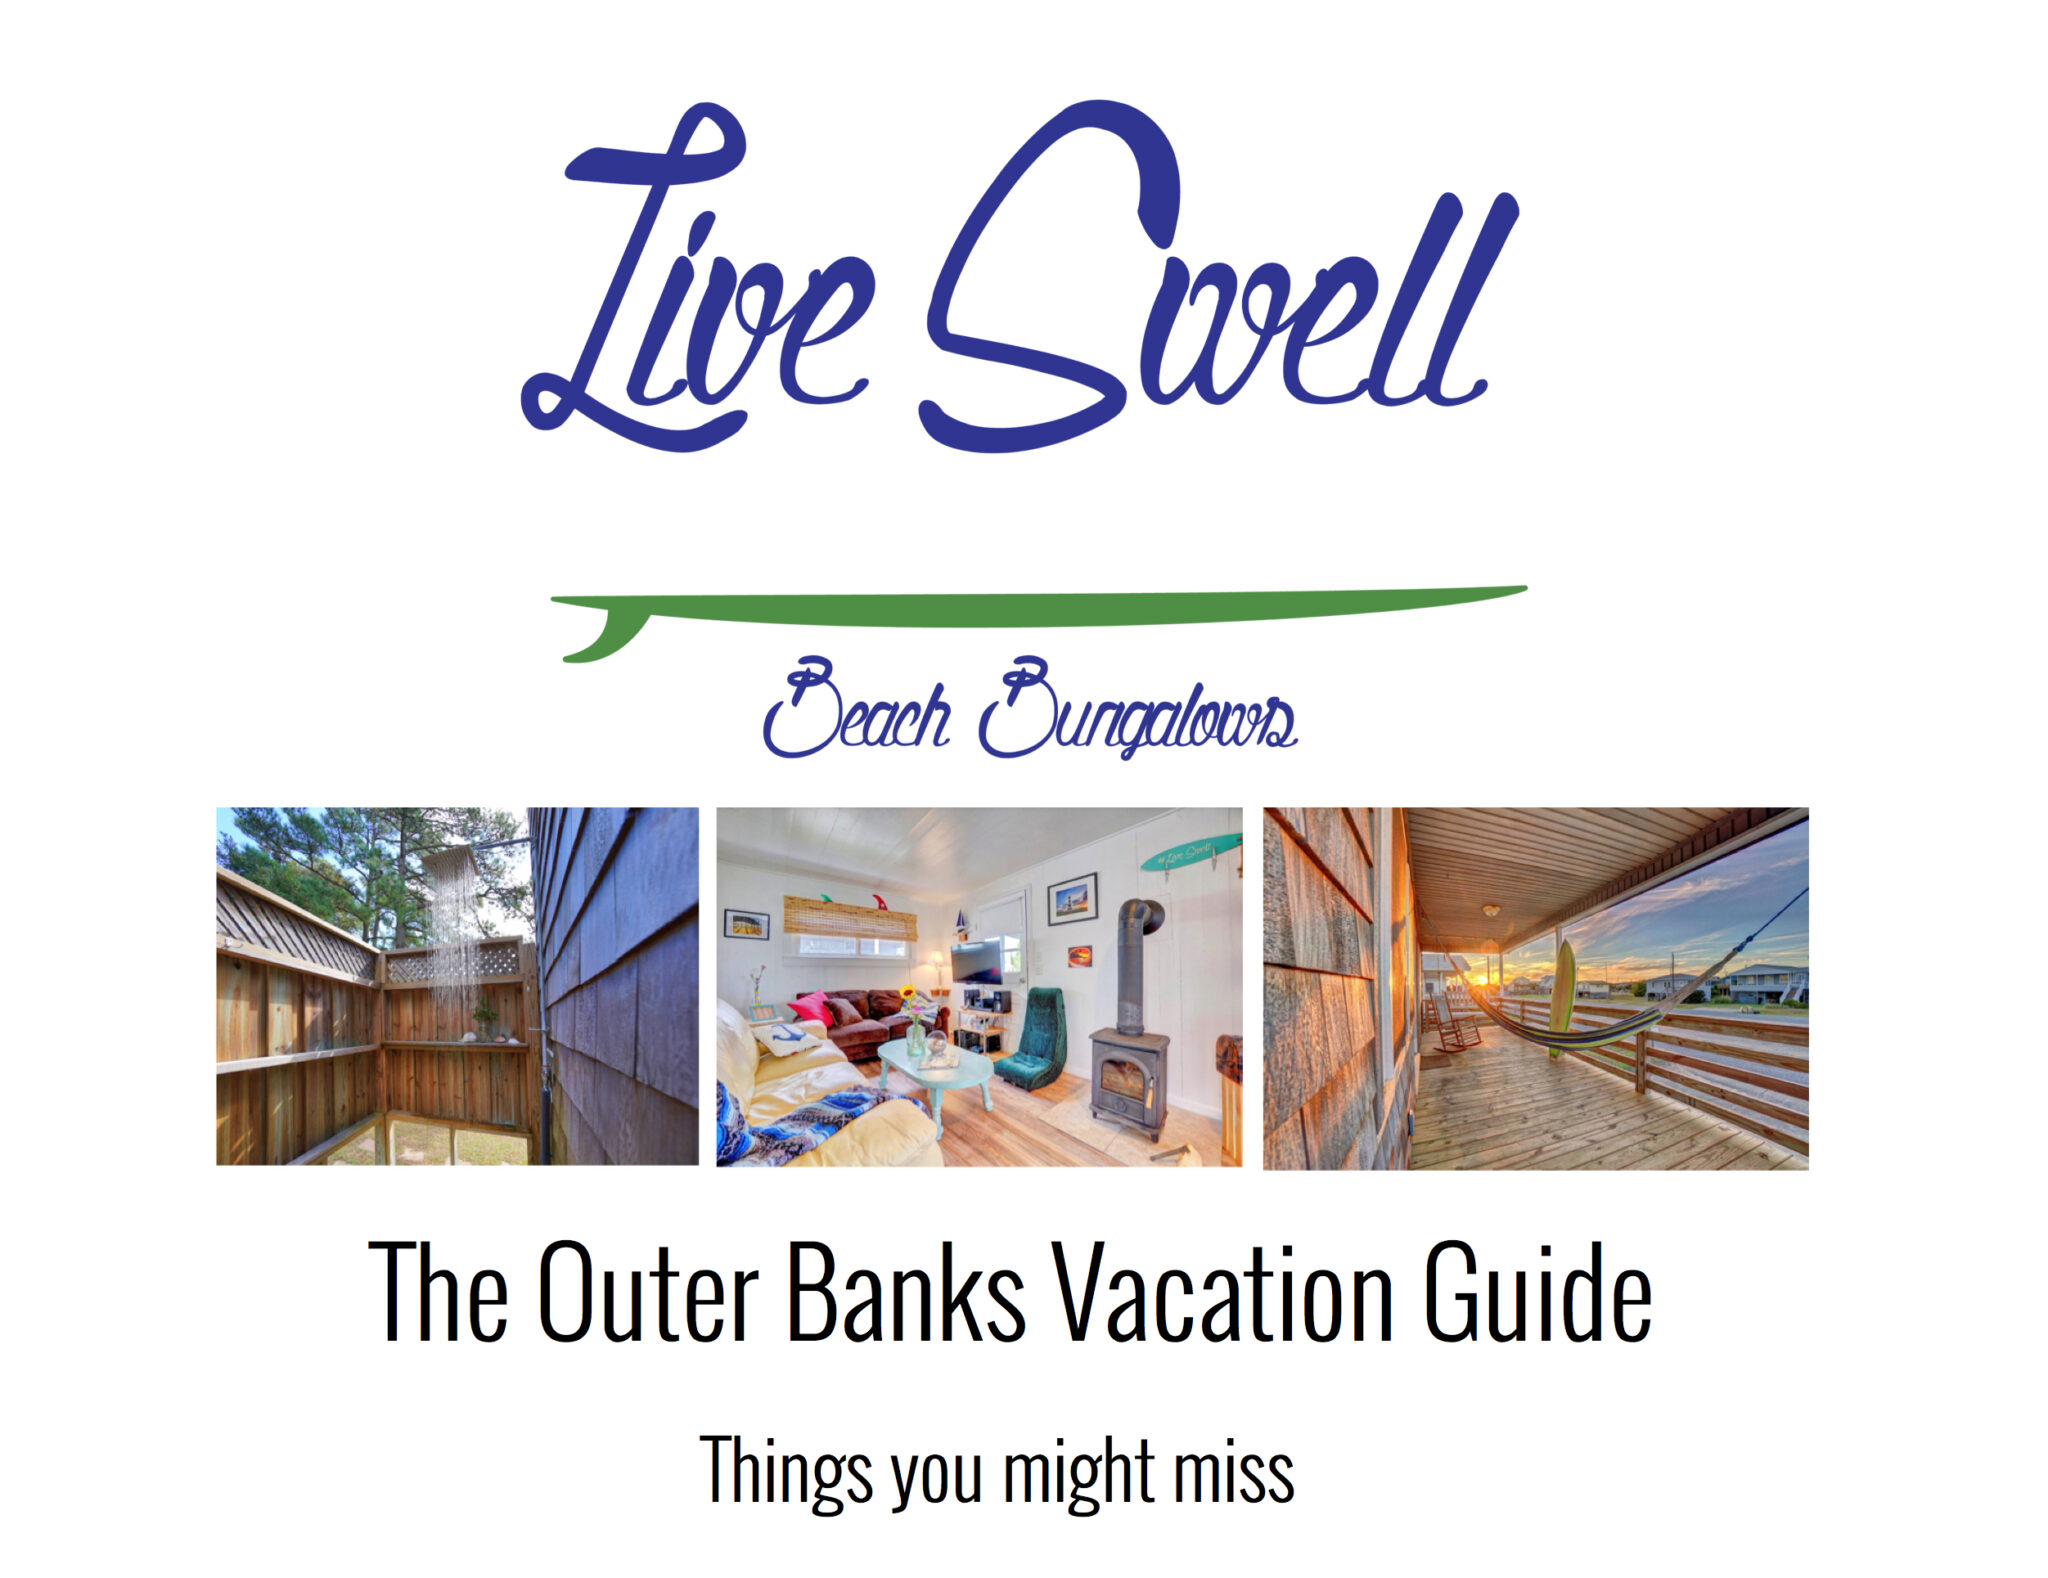 The Outer Banks Vacation Guide – Things you might miss